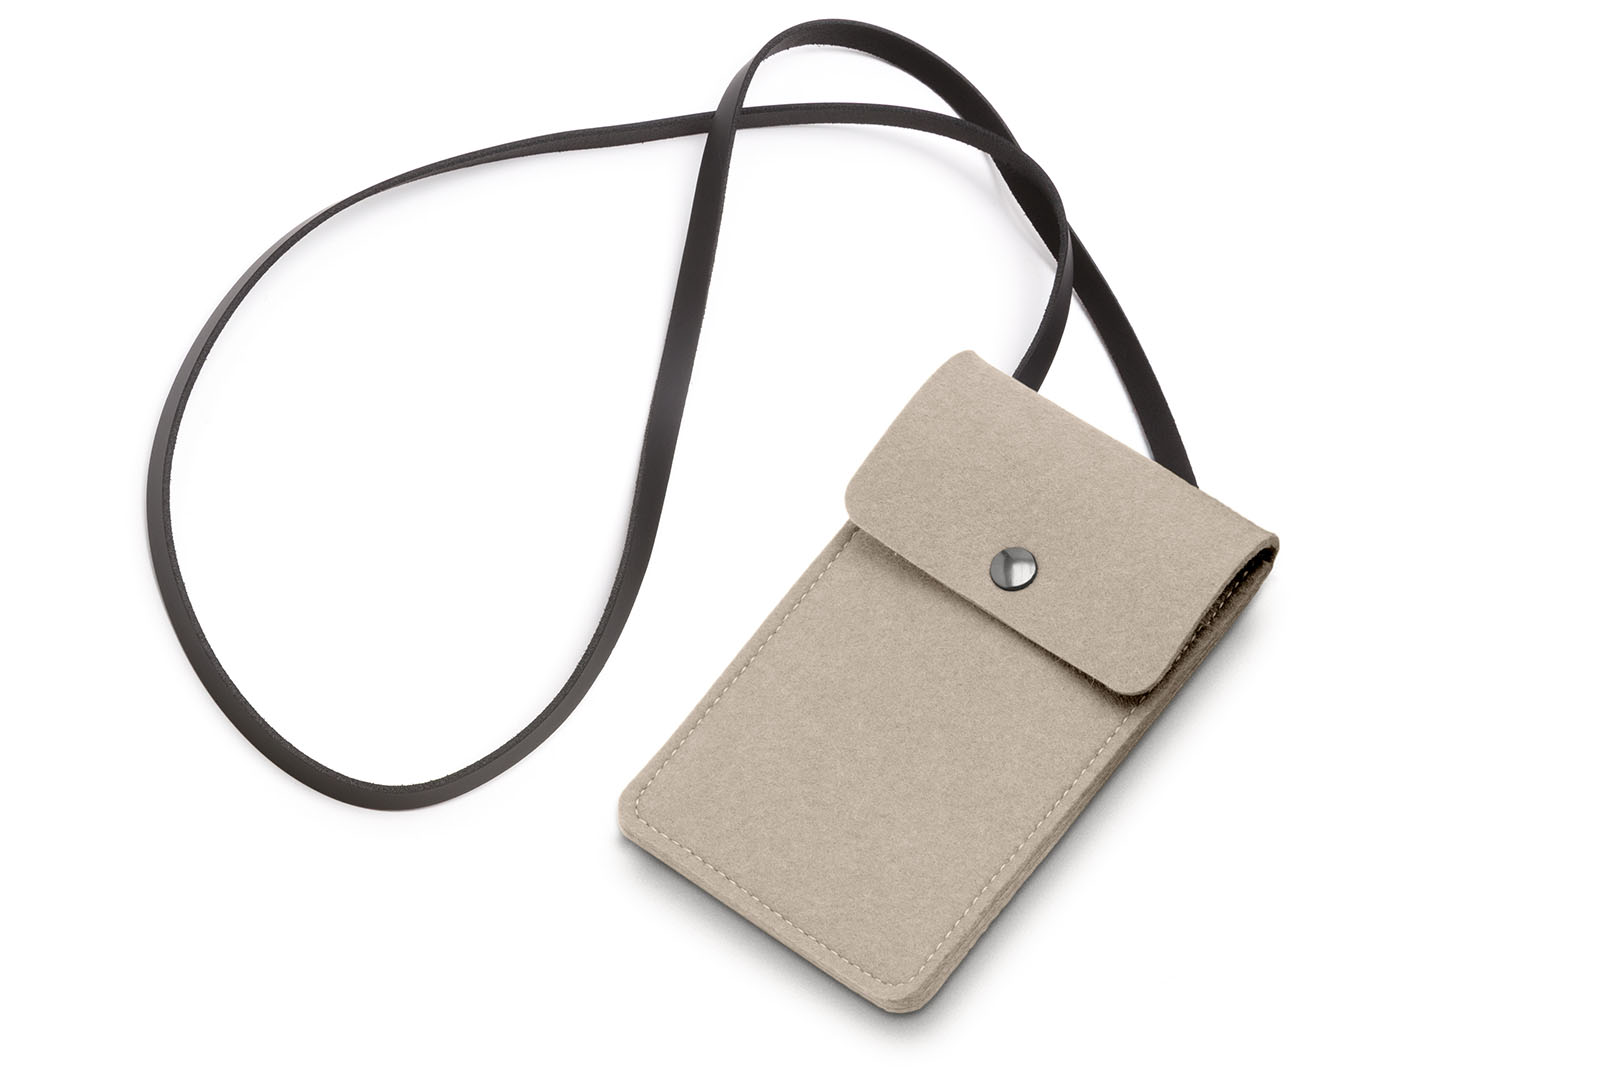 HEY-Sign Smart Bag in der Farbe "Stone"